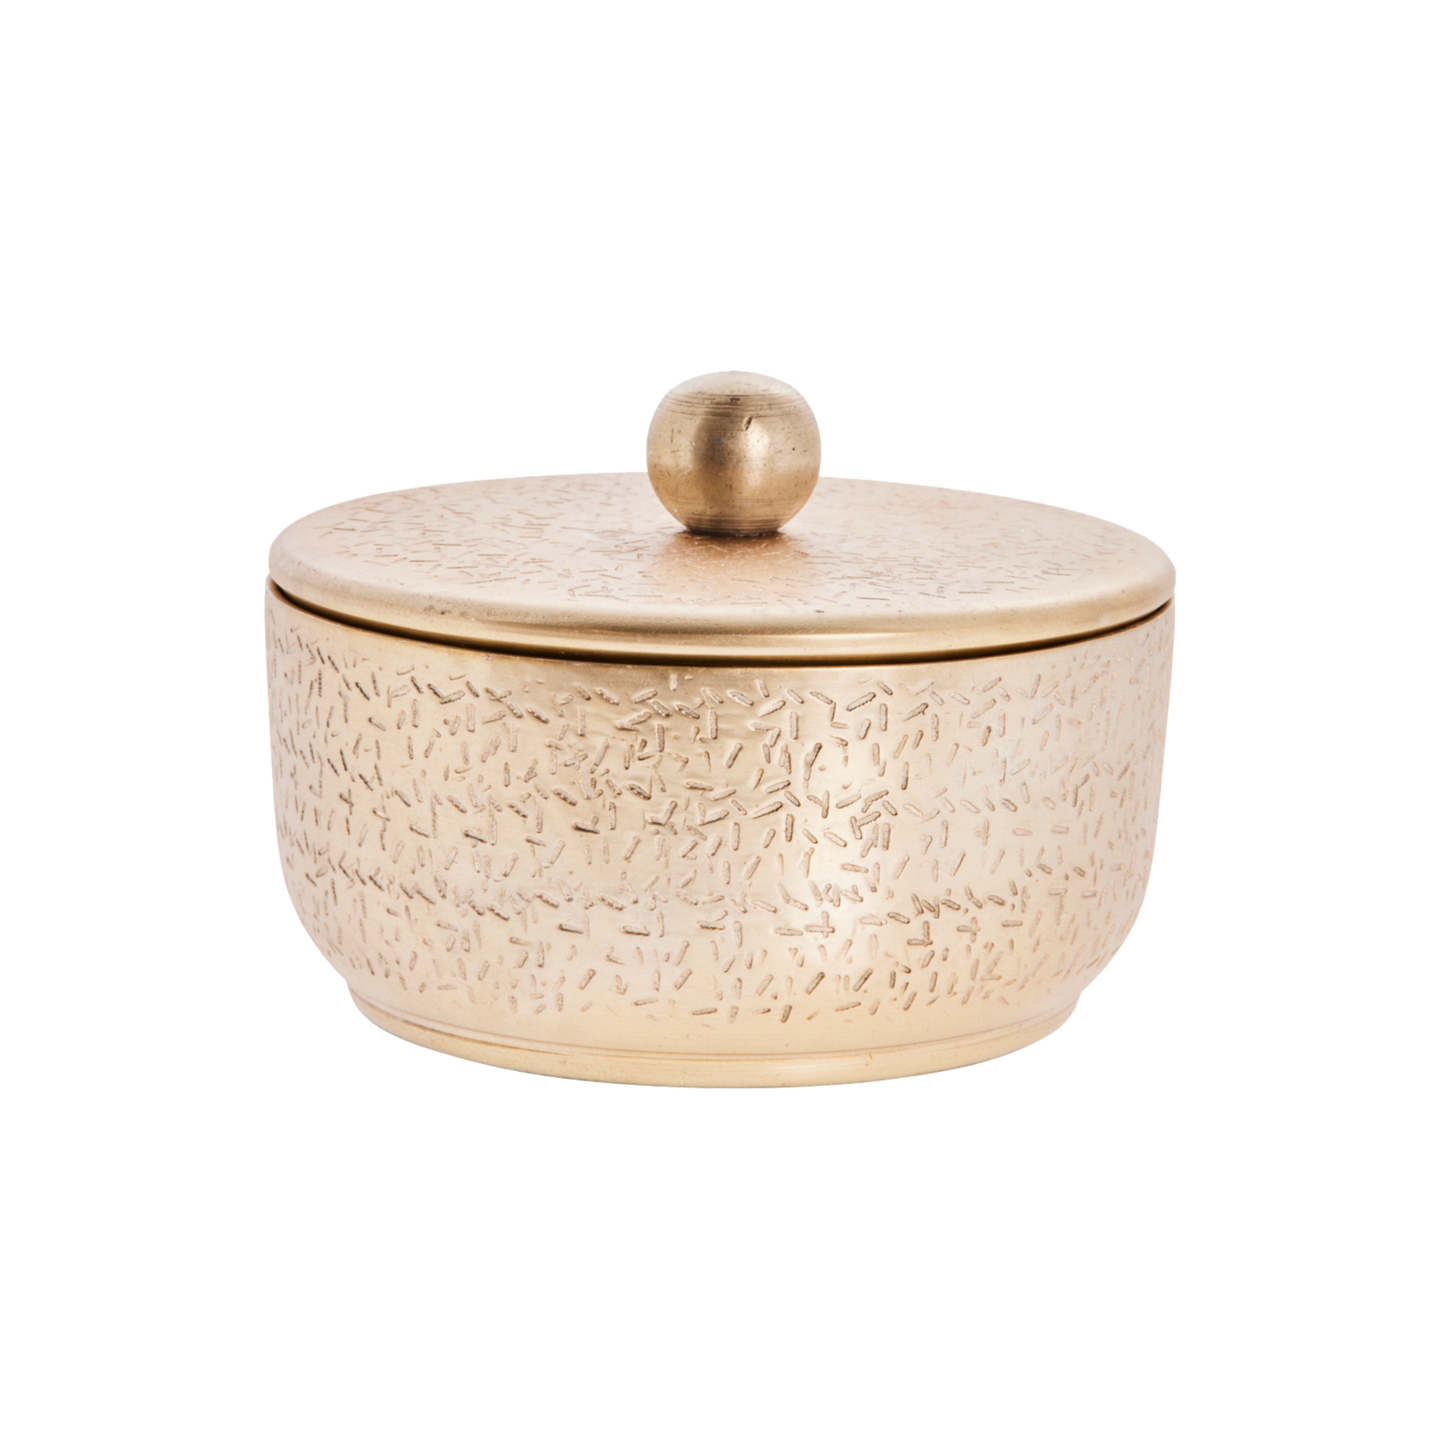 Textured gold jar with lid